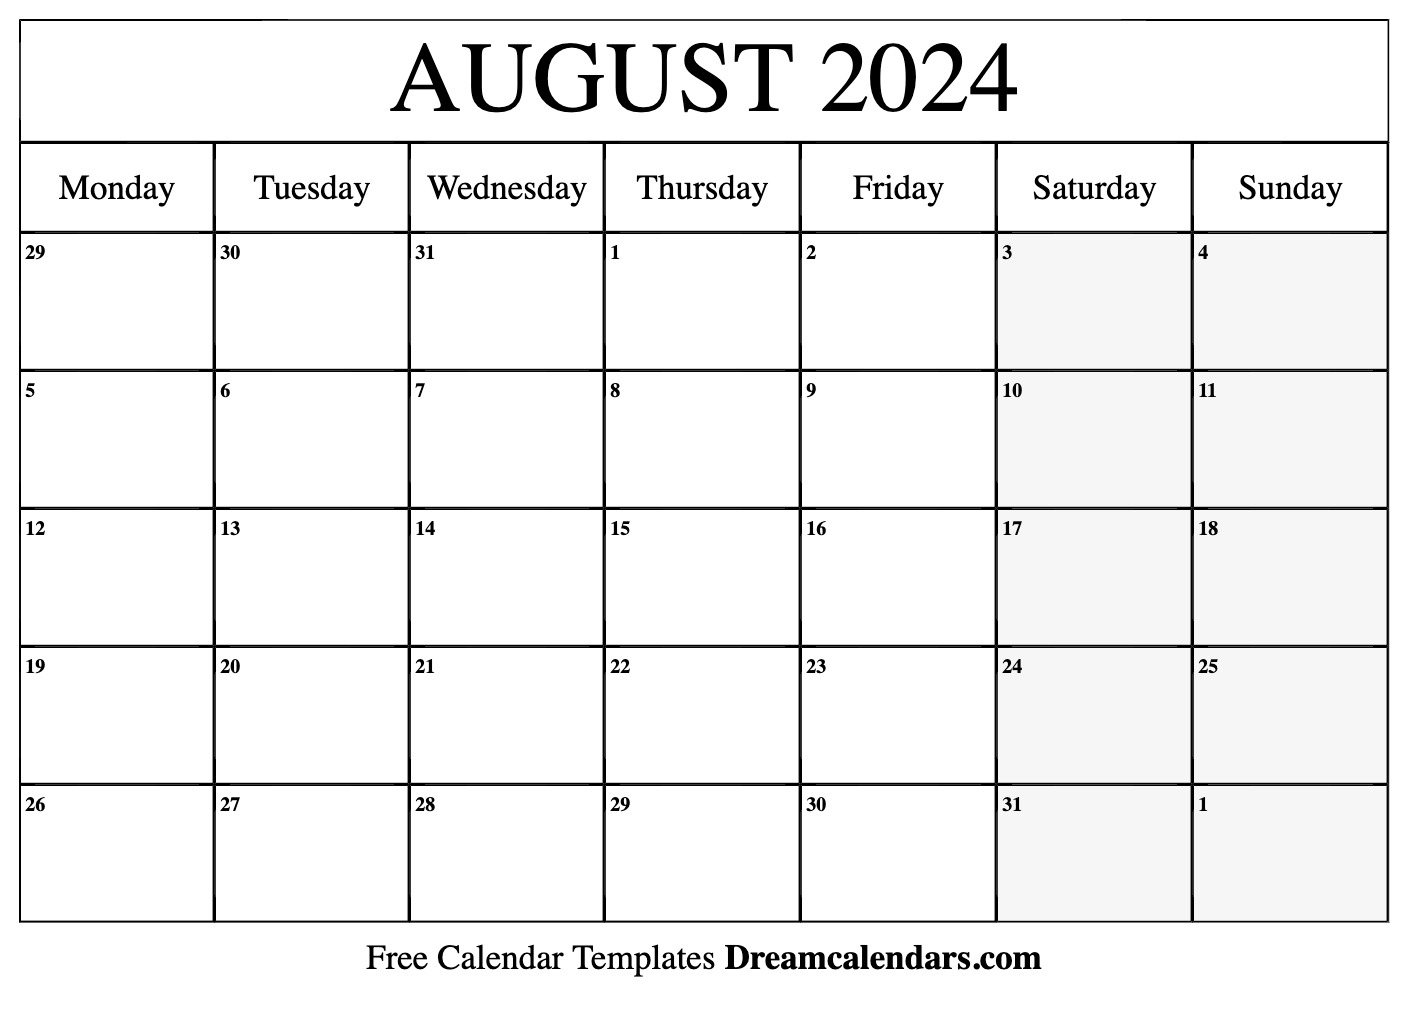 August 2024 Calendar | Free Blank Printable With Holidays for 2024 August Calendar Printable